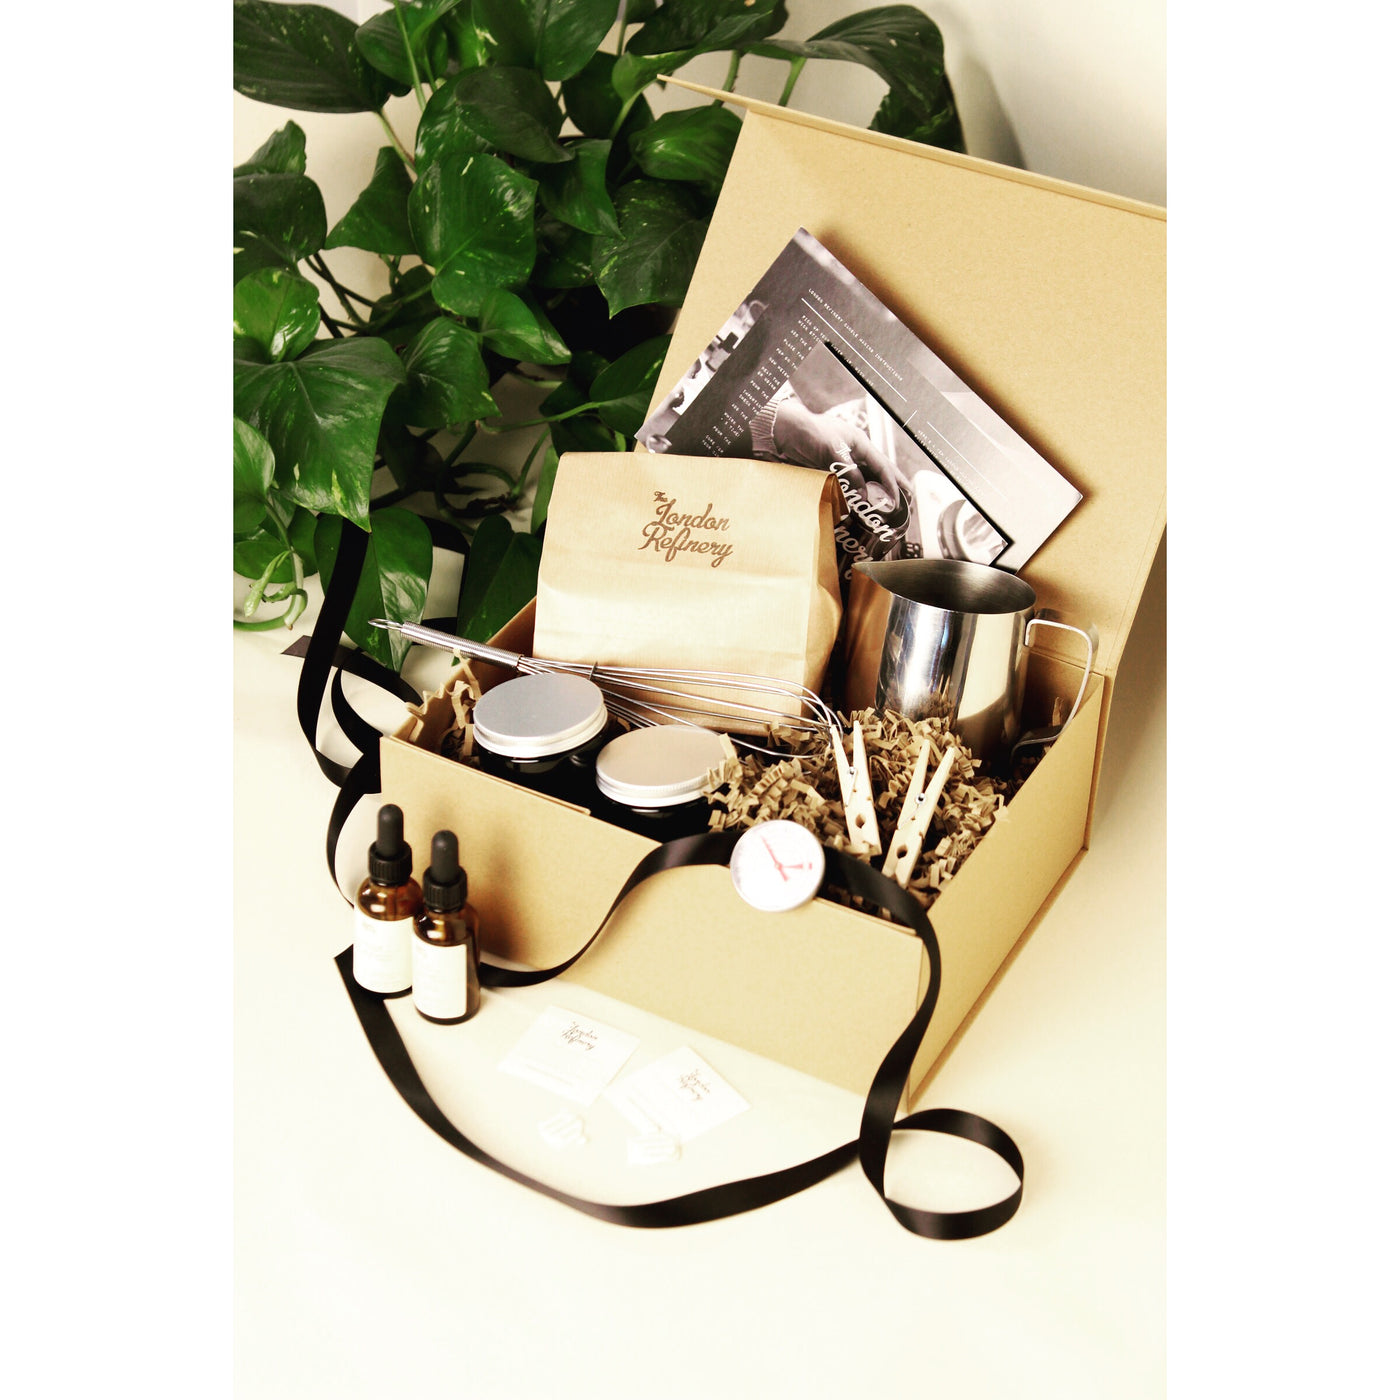 The London Refinery Candle Making Kit